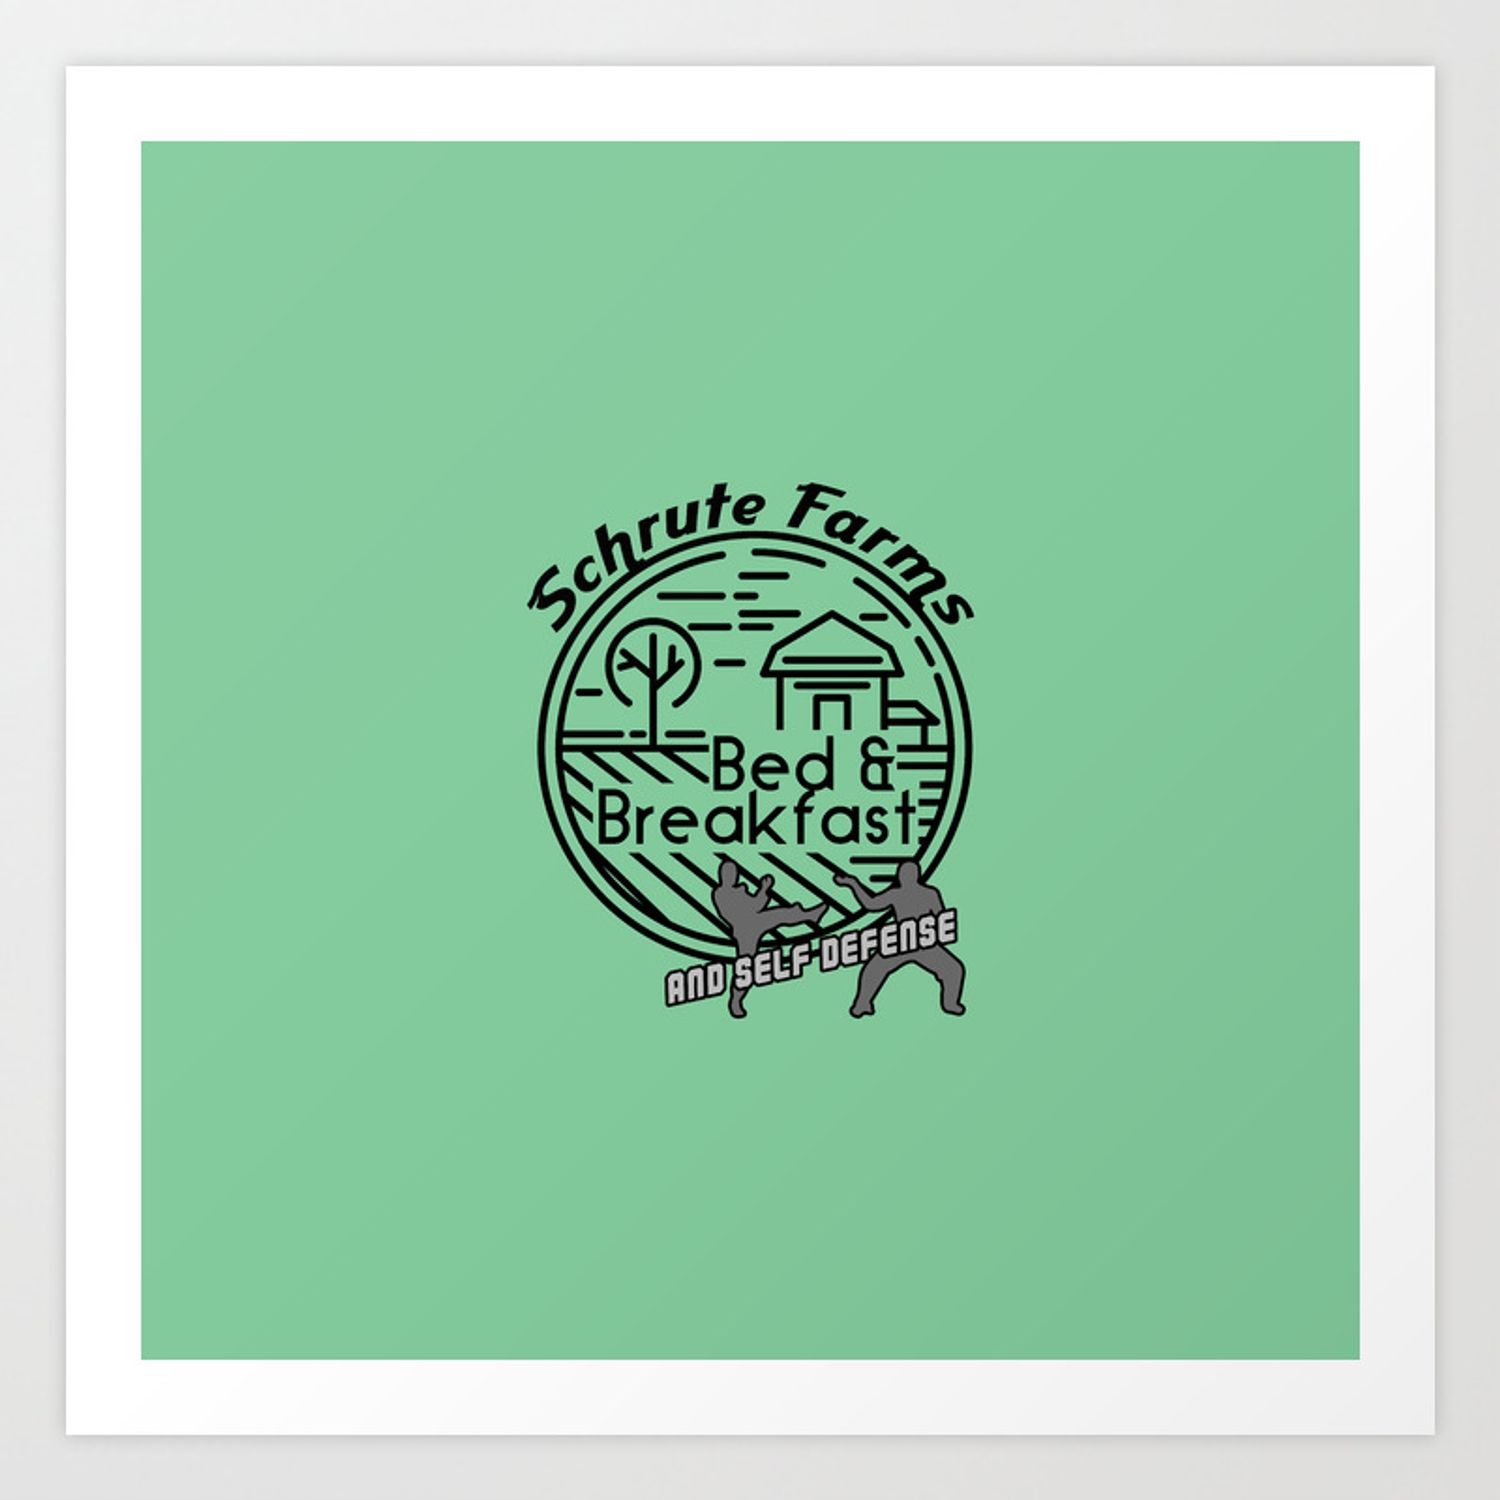 Schrute Farms bed and breakfast and self defense Art Print